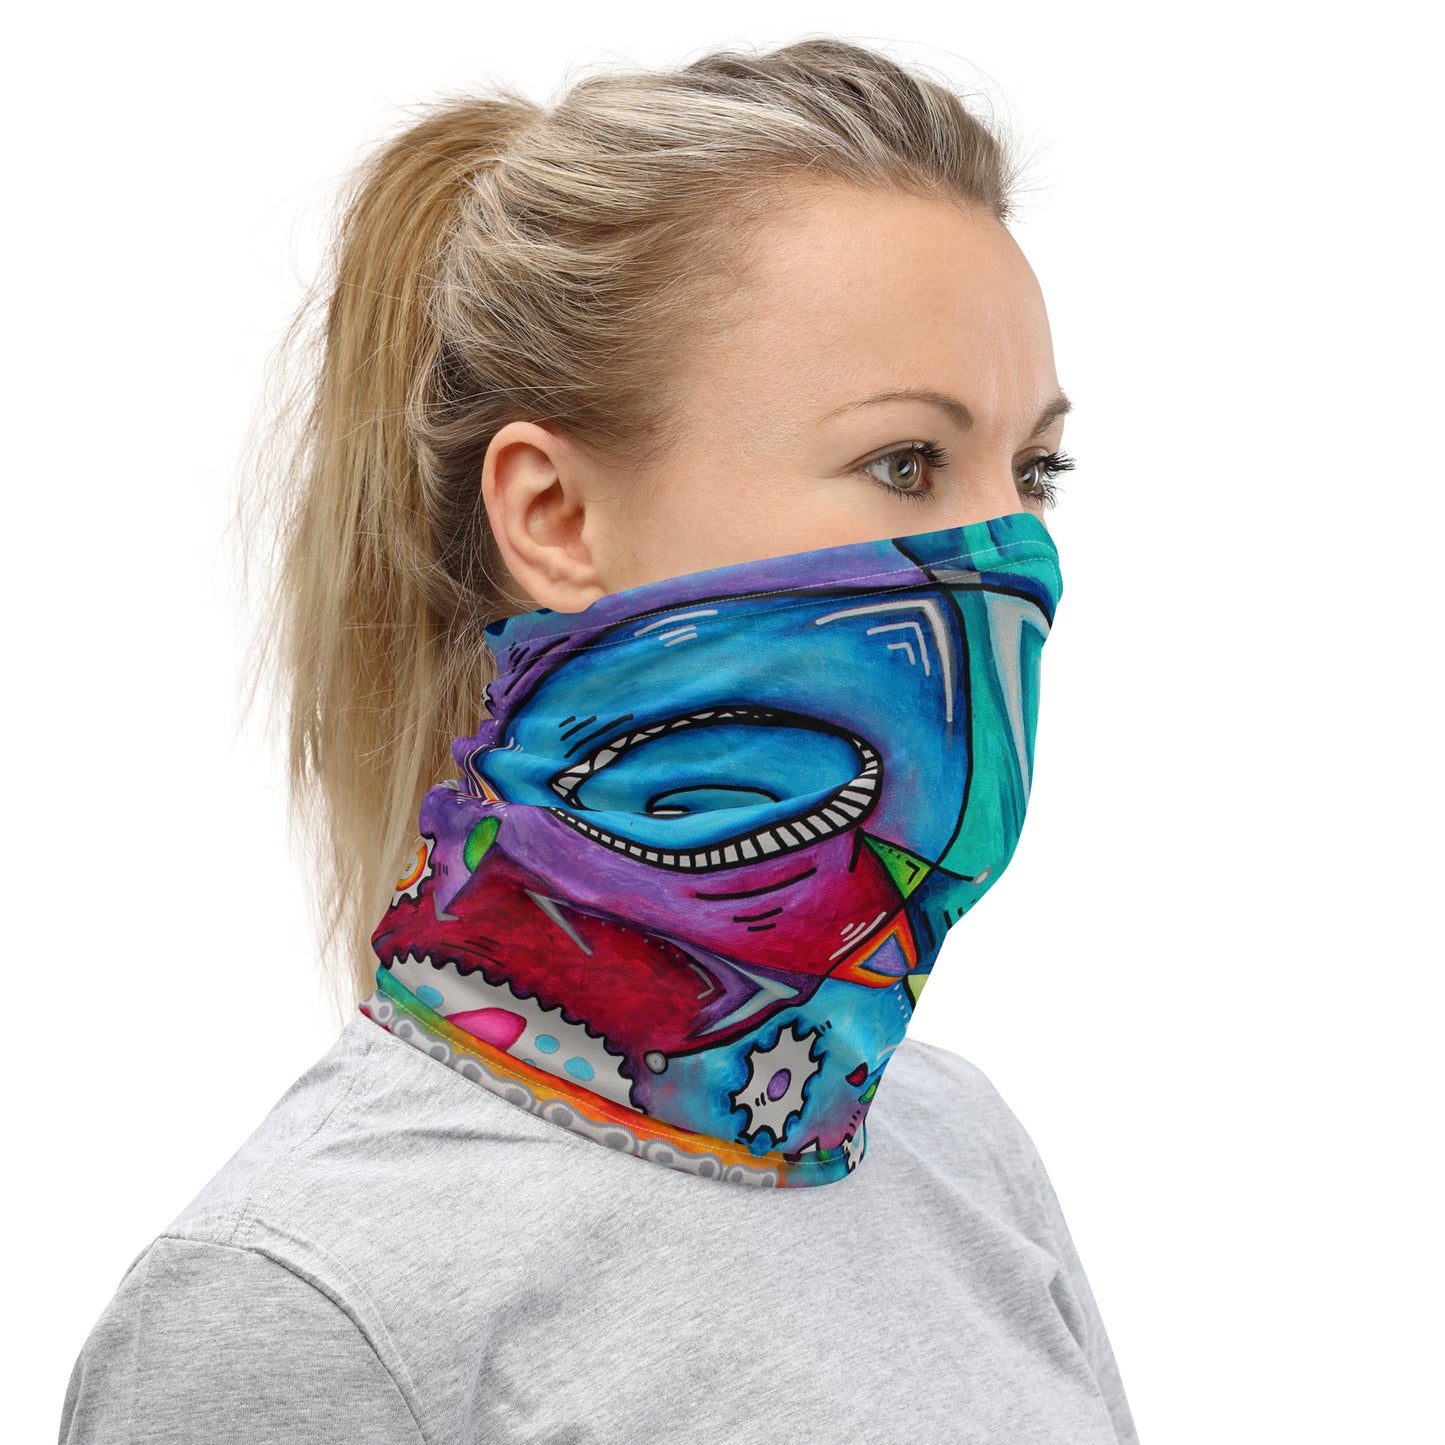 Colorful Cycling Neck Gaiter with Chains and Gears Original Artwork AROON